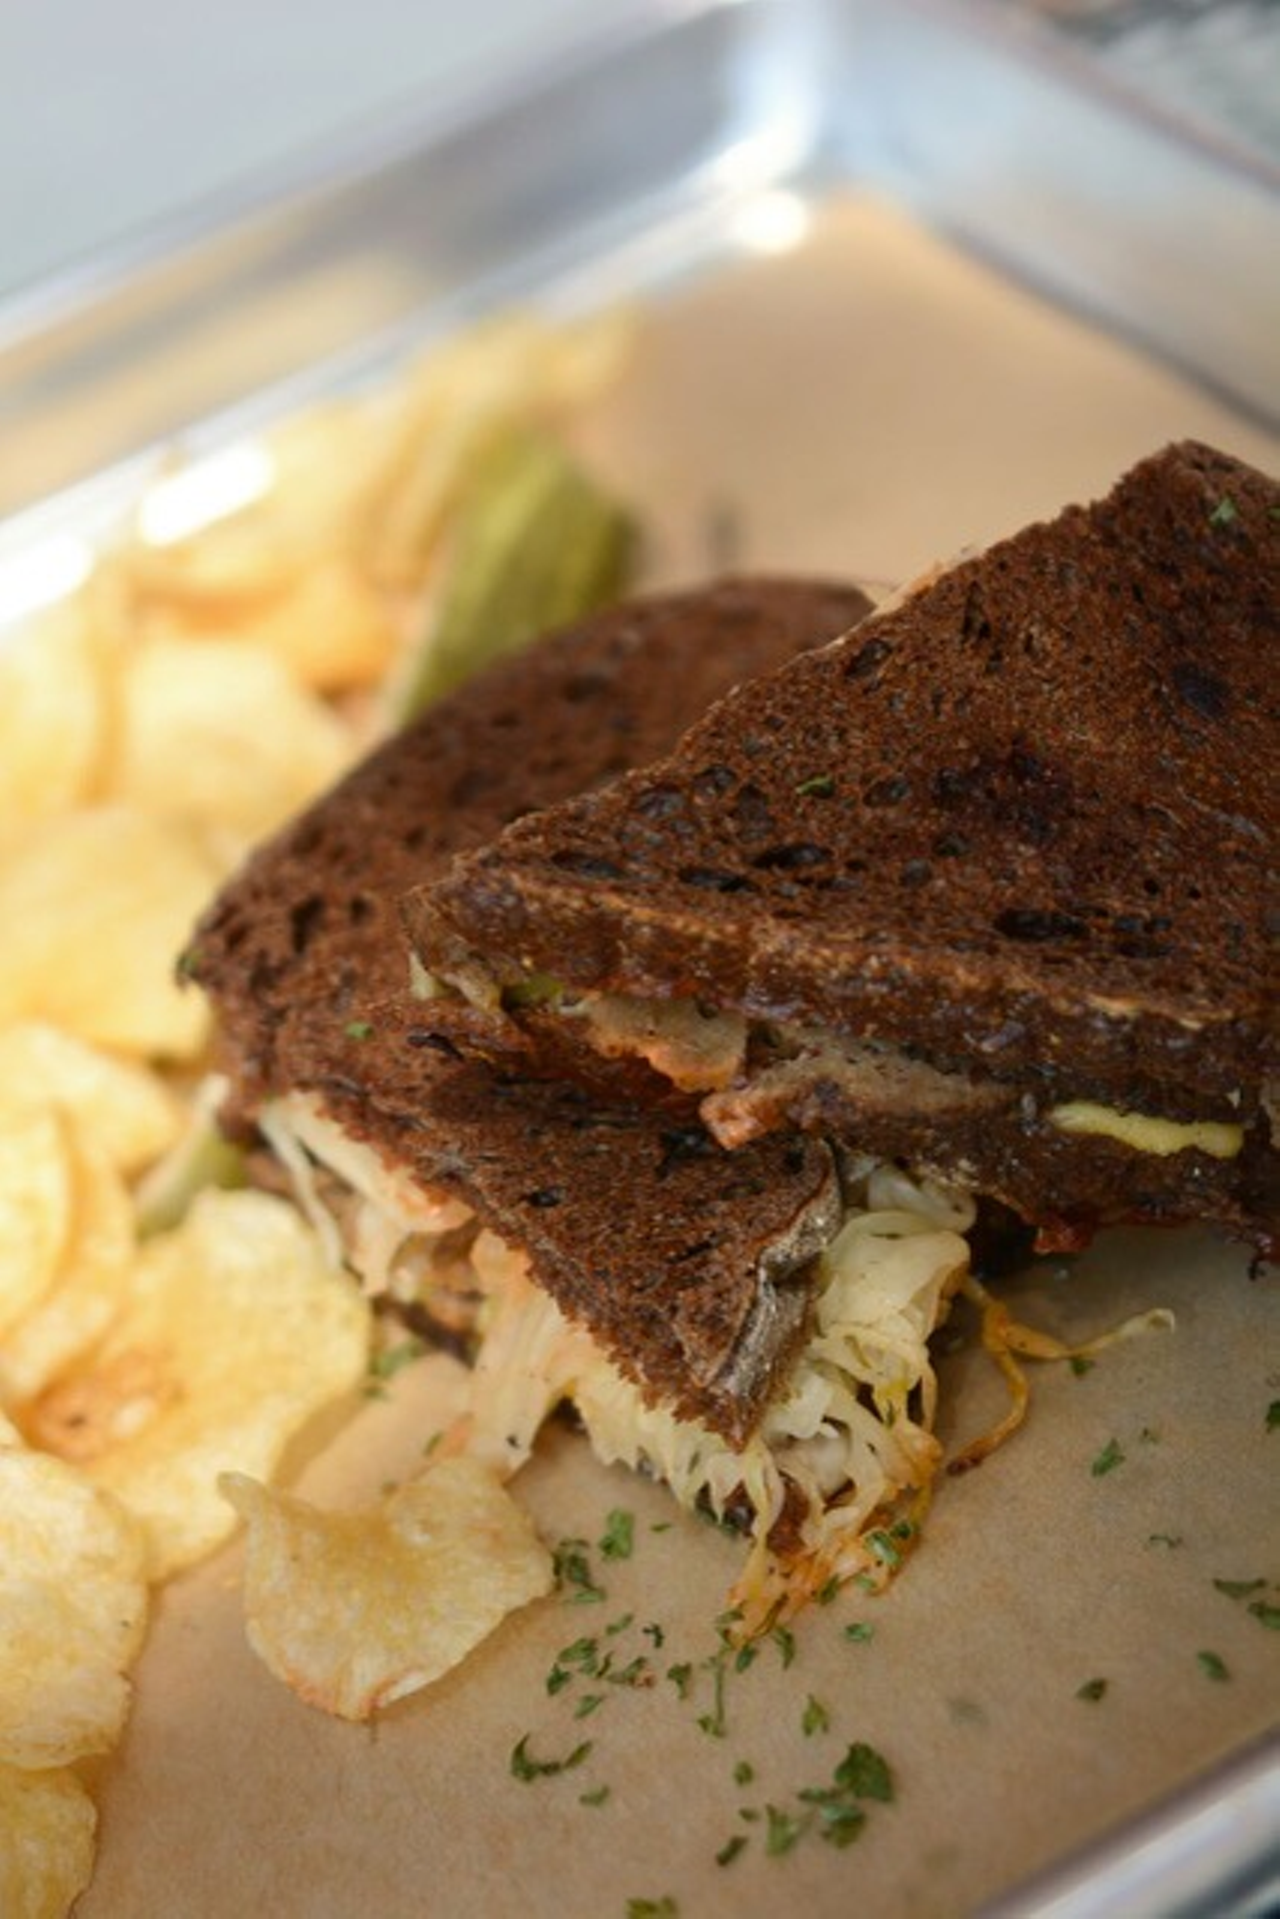 Reubens are signature items at the deli. This one is made with vegan pastrami.